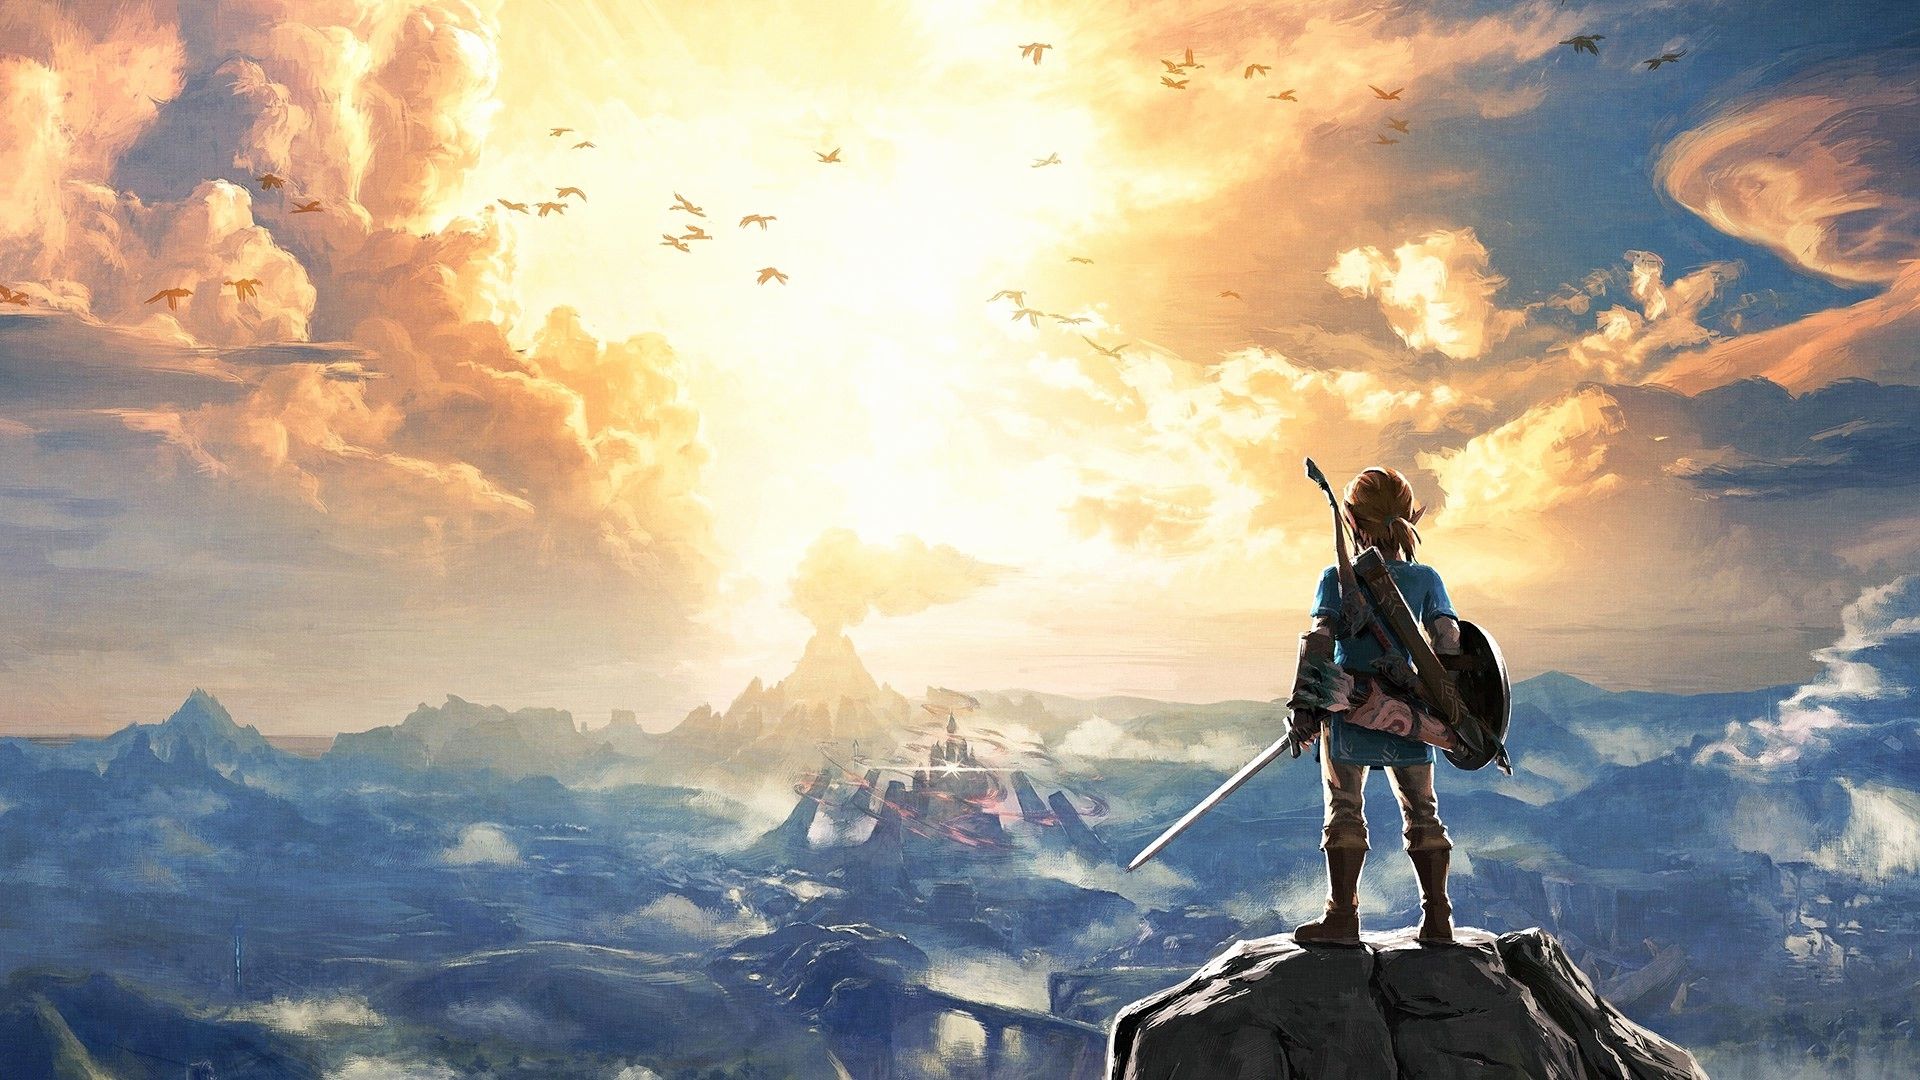 1920x1080 Breath Of The Wild Wallpaper 1080p Unique The Legend Of Zelda Breath Of The Wild Hd Wallpaper And Background Stmed 2022 Left Of The Hudson